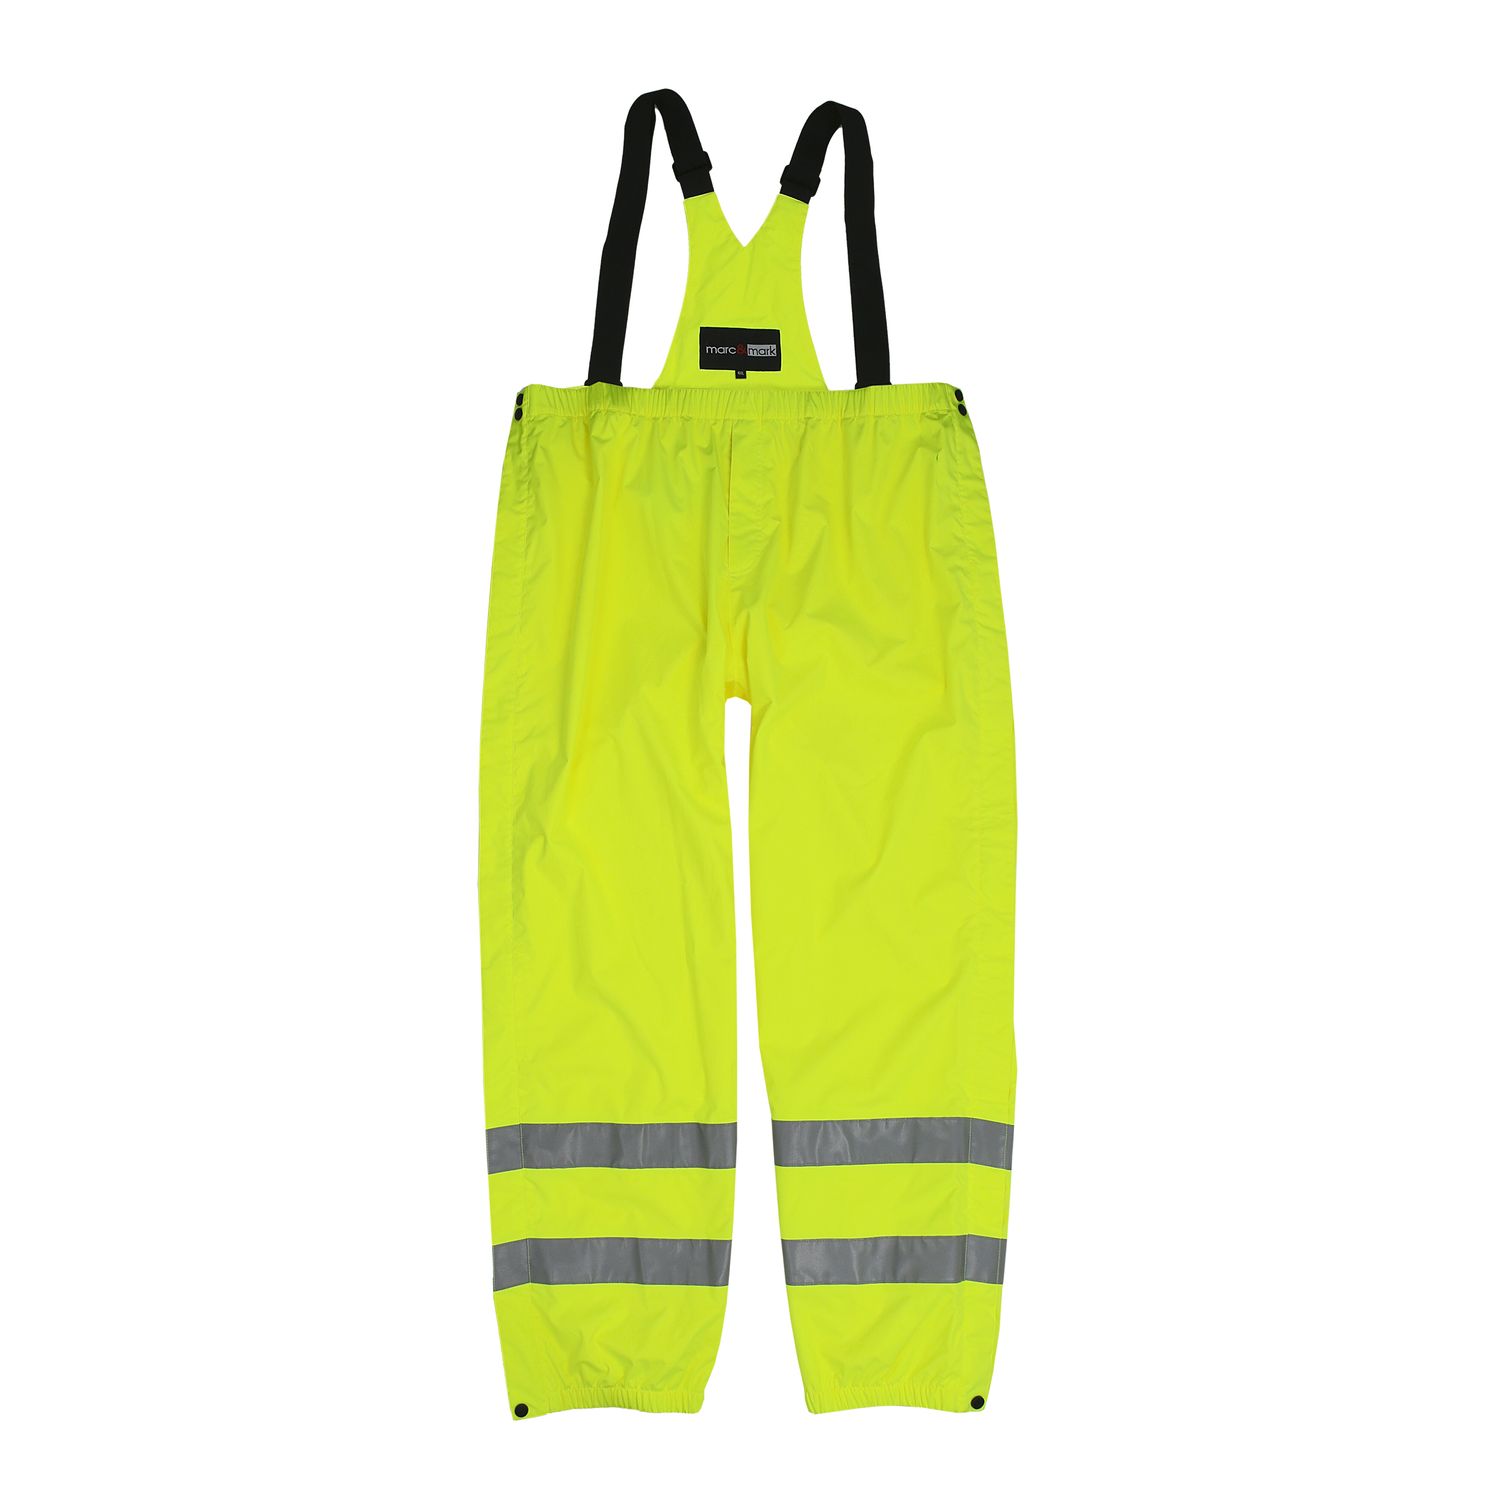 Functional working trousers by marc & mark in large sizes 3XL-10XL / neon yellow - high visibility